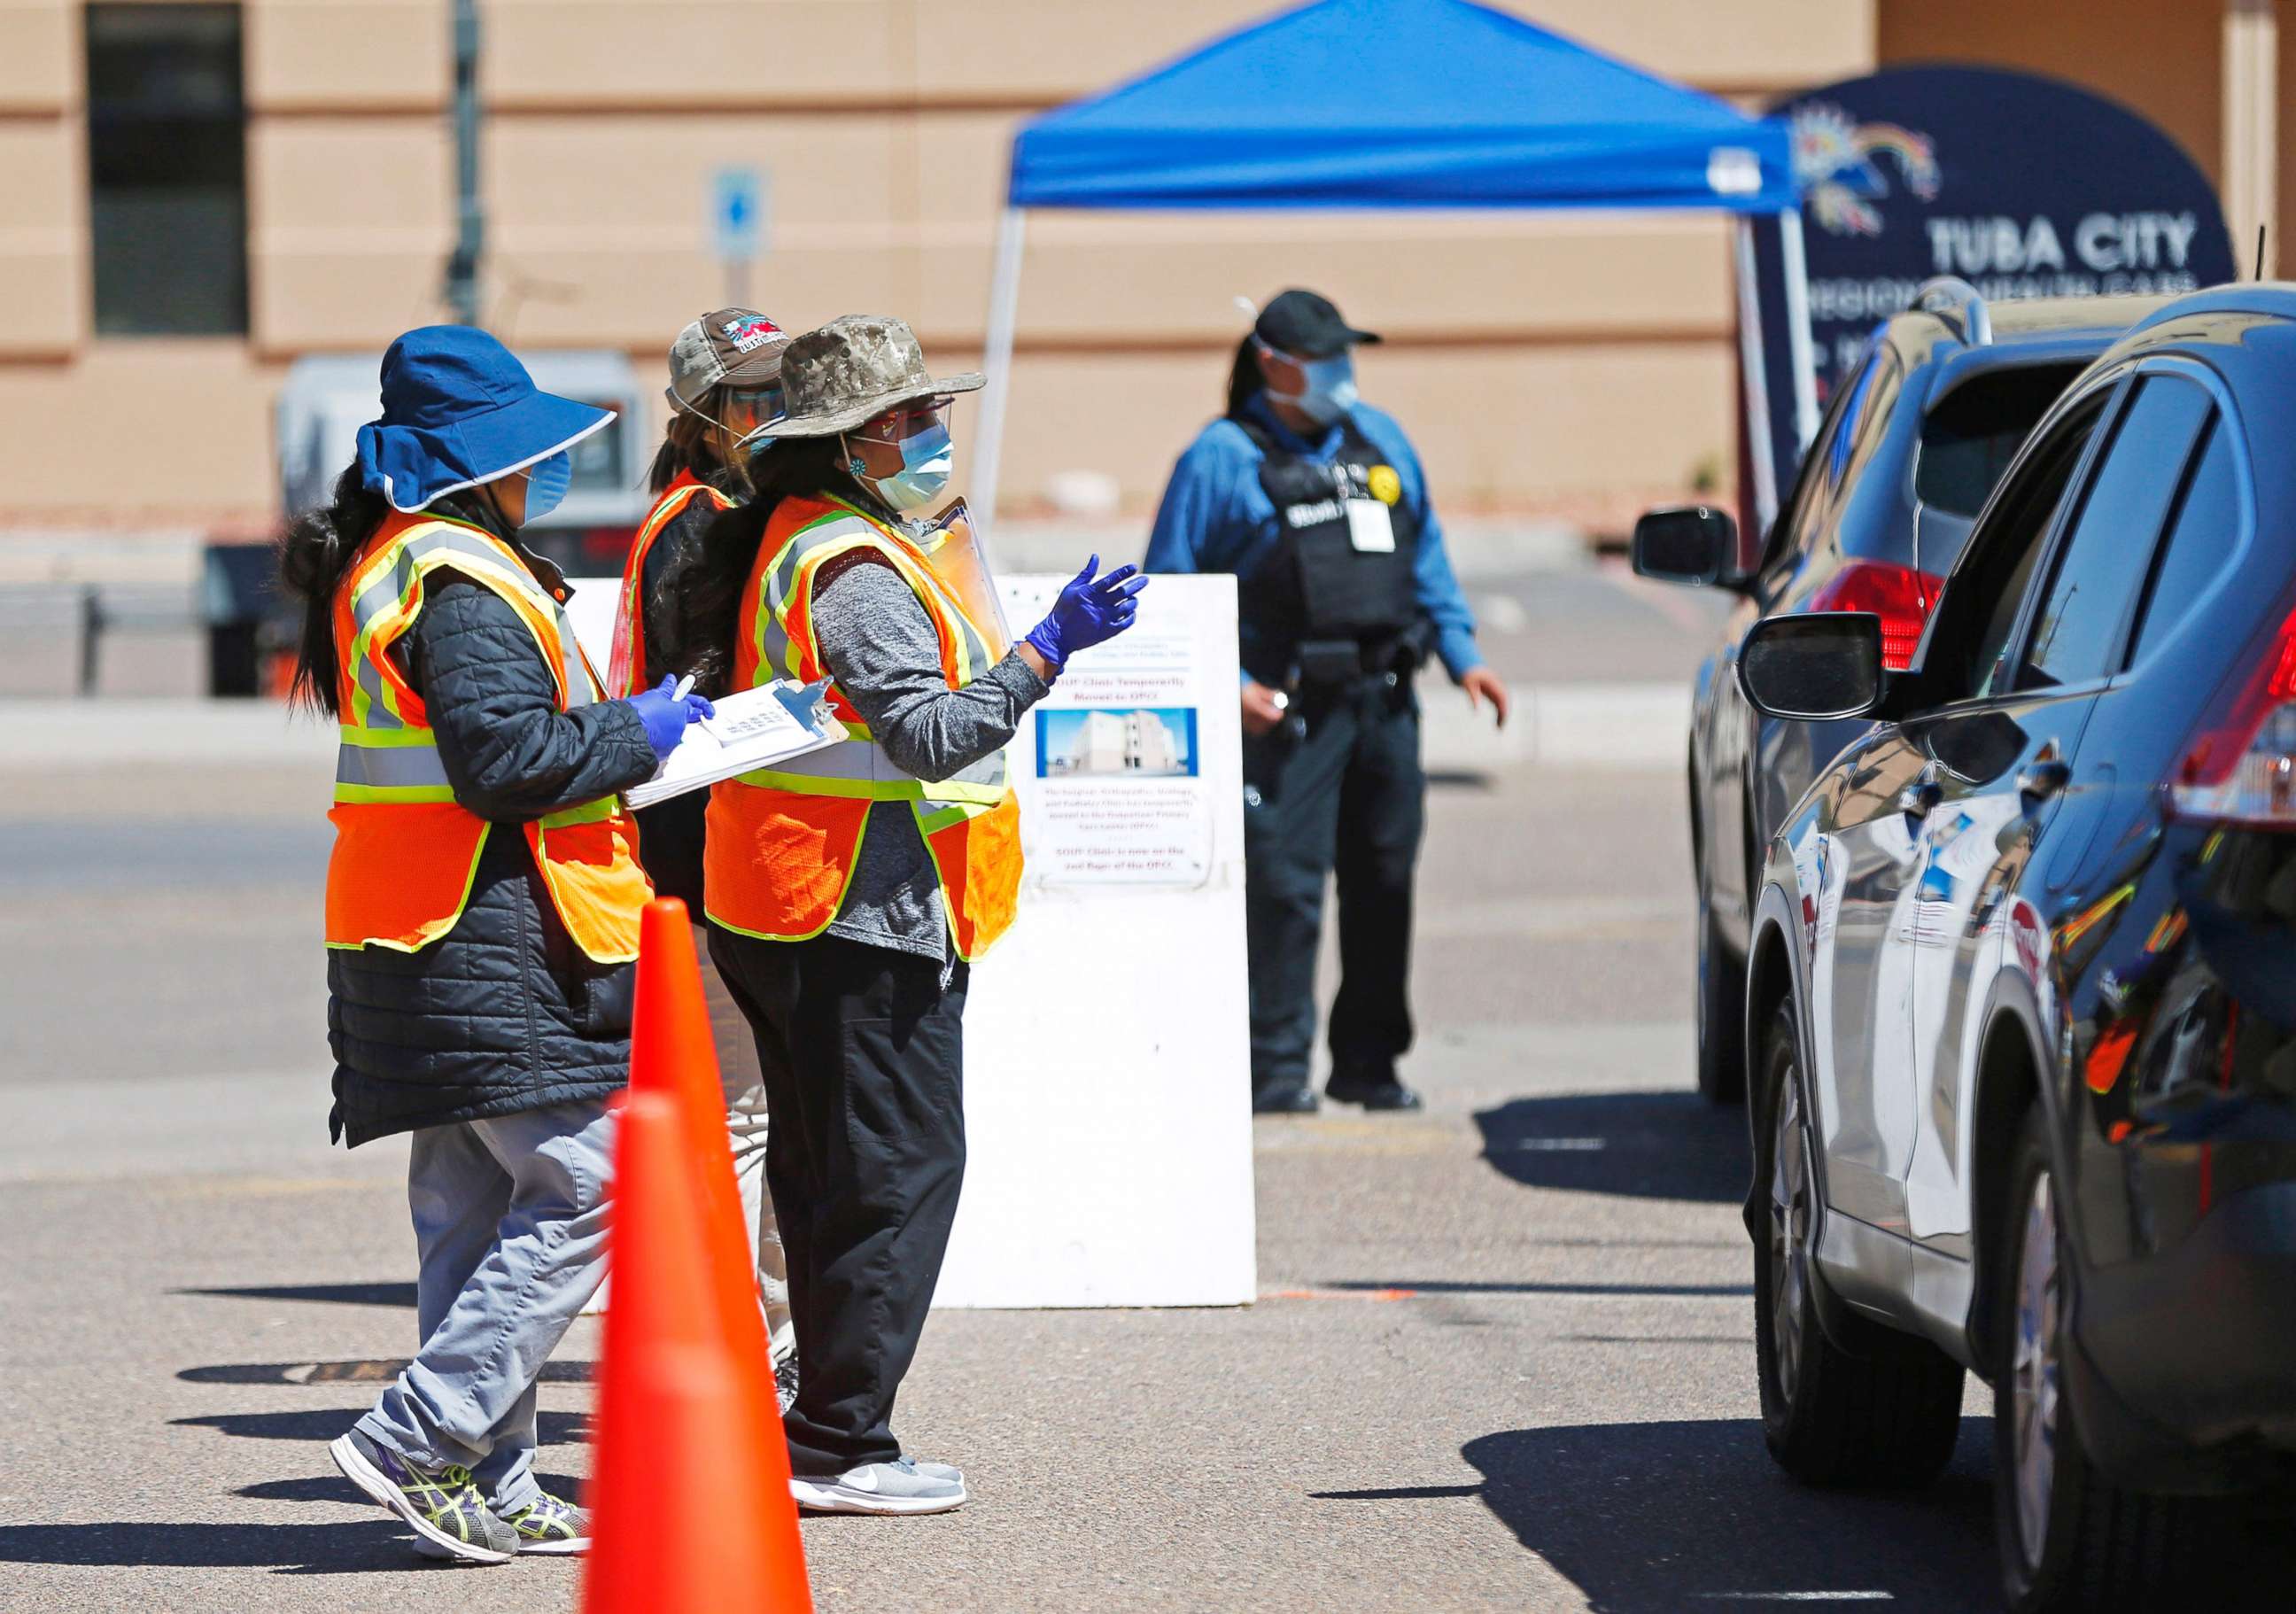 PHOTO: In this file photo, staff at the Tuba City Regional Health Care Center screen people entering their campus  on April 14, 2020. The hospital on Navajo Reservation in Arizona has seen a spike in COVID-19 cases.